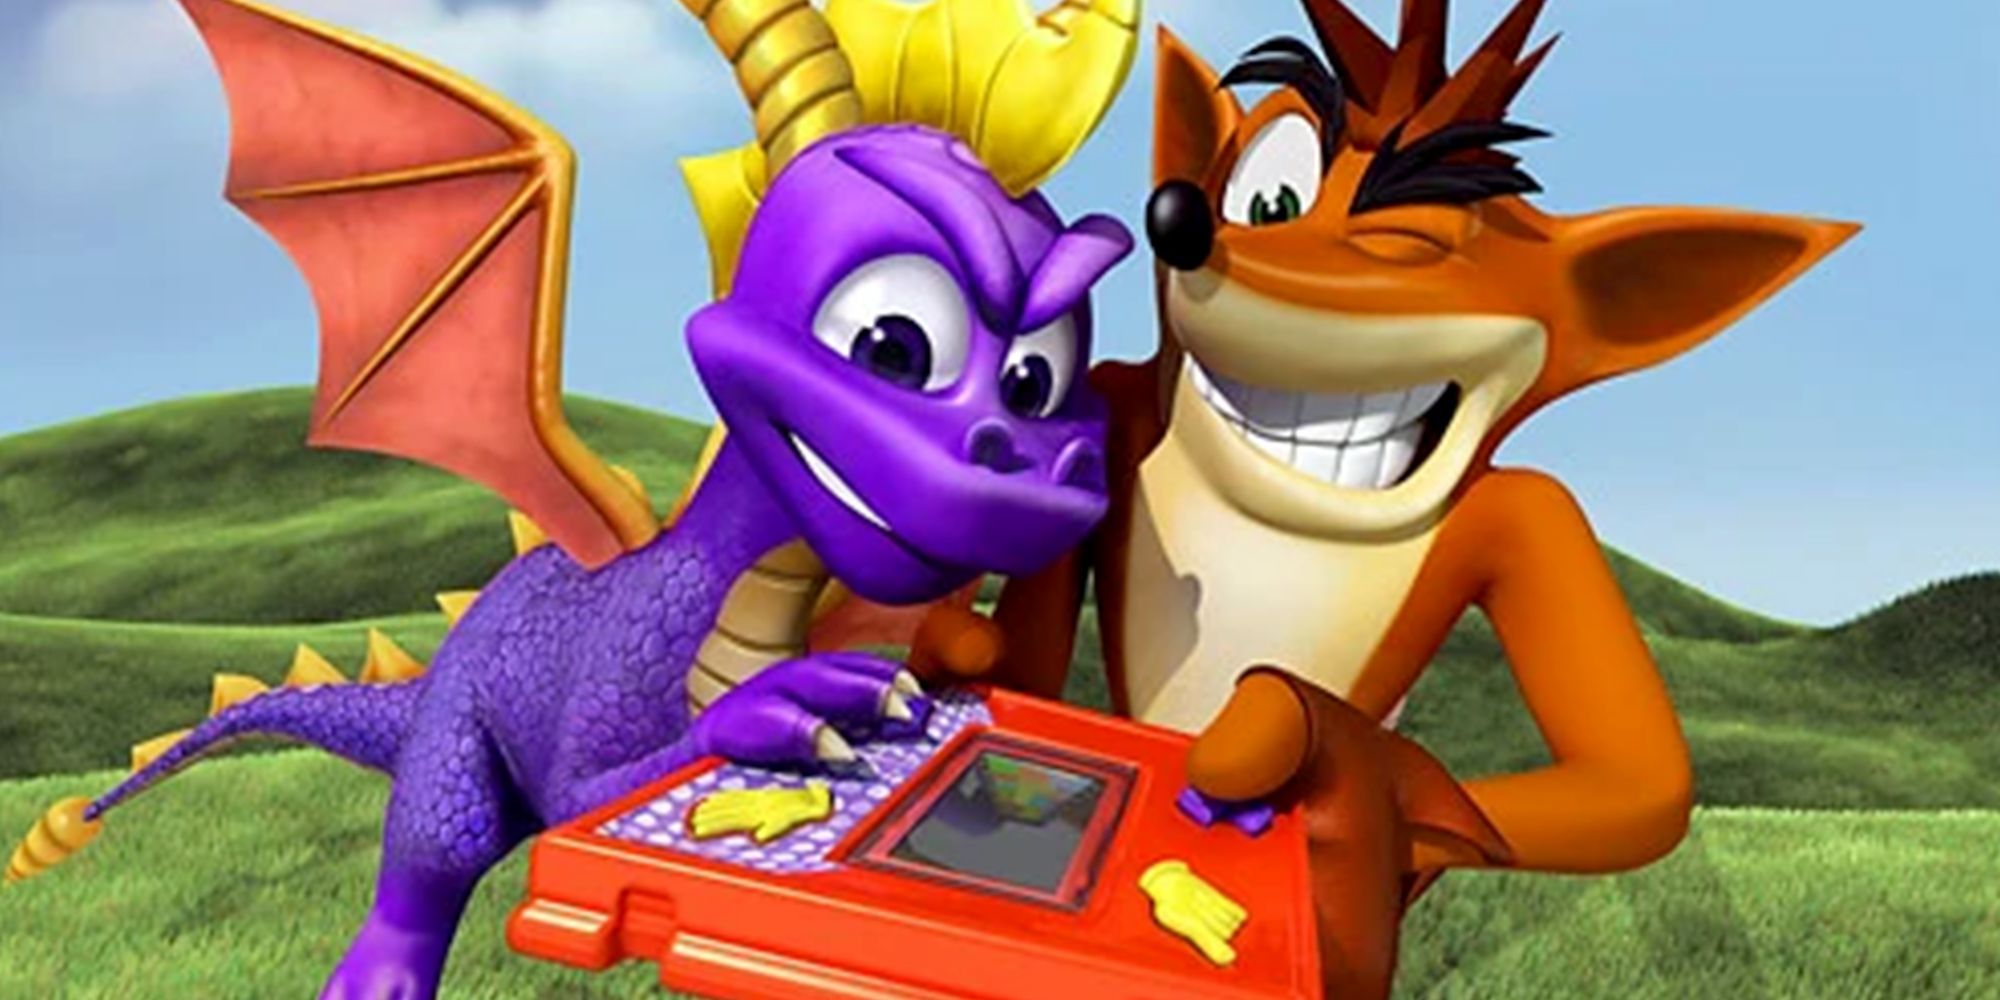 Spyro and Crash fighting over a game controller.